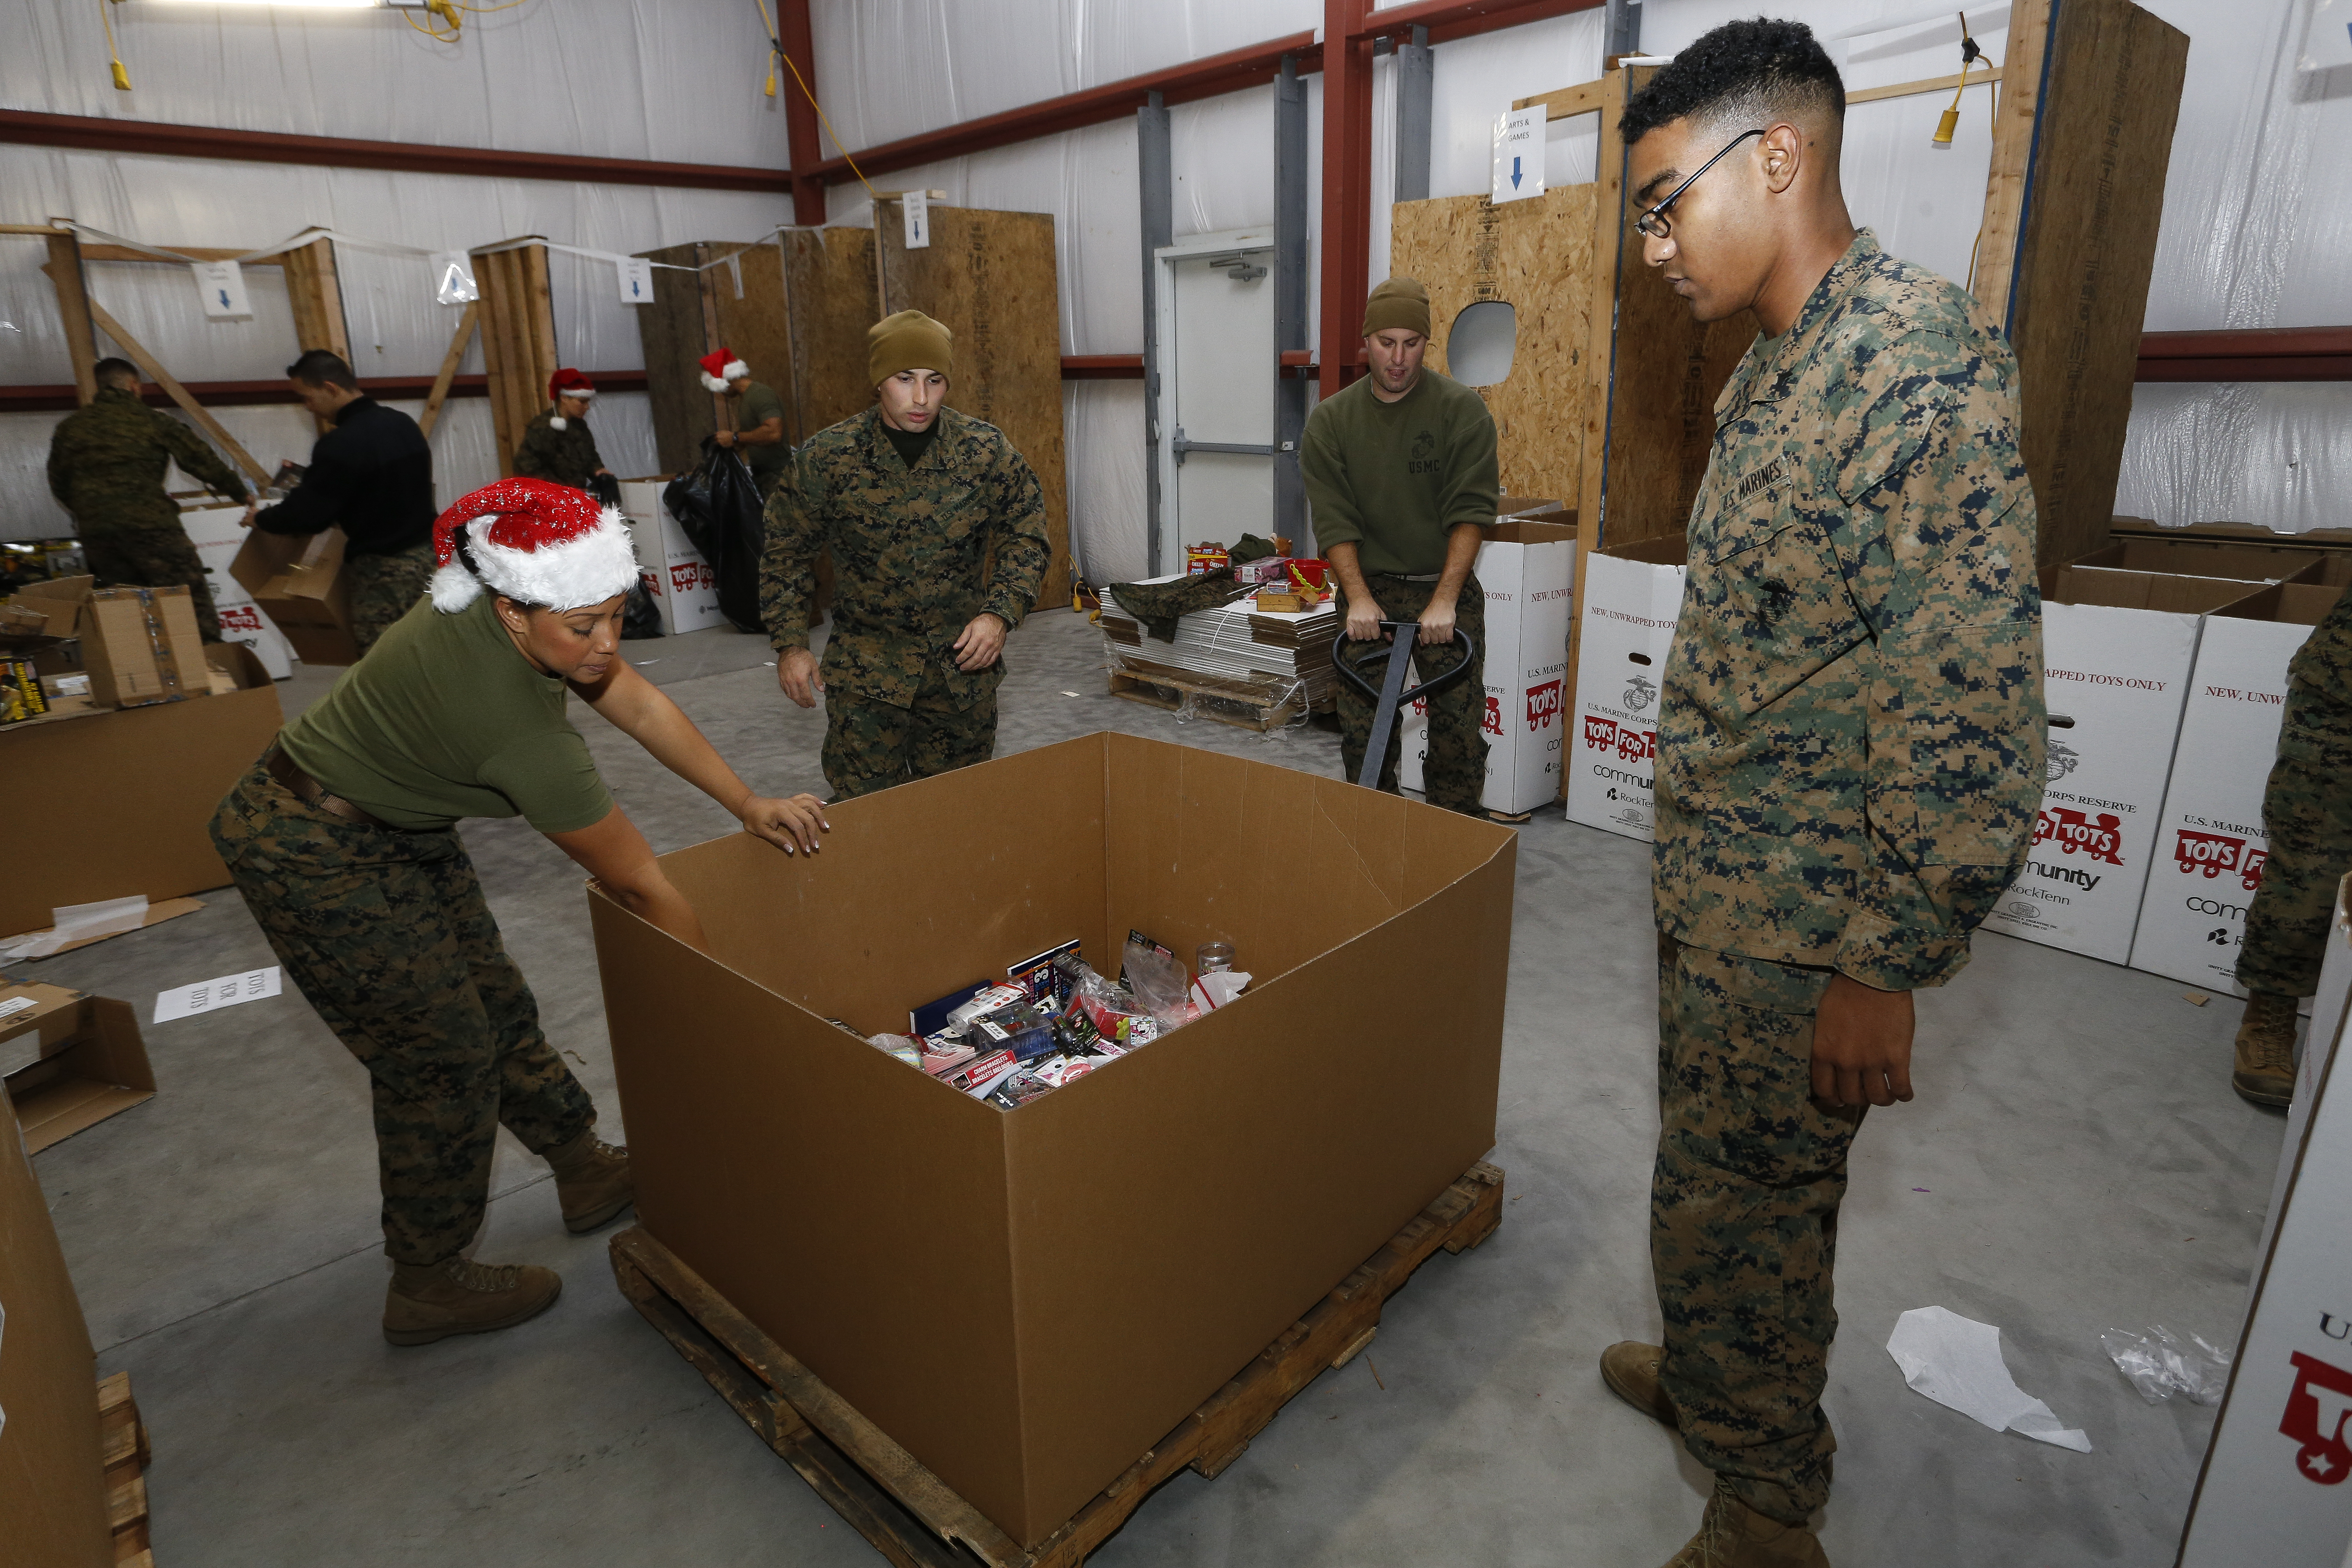 Marine Toys For Tots Foundation